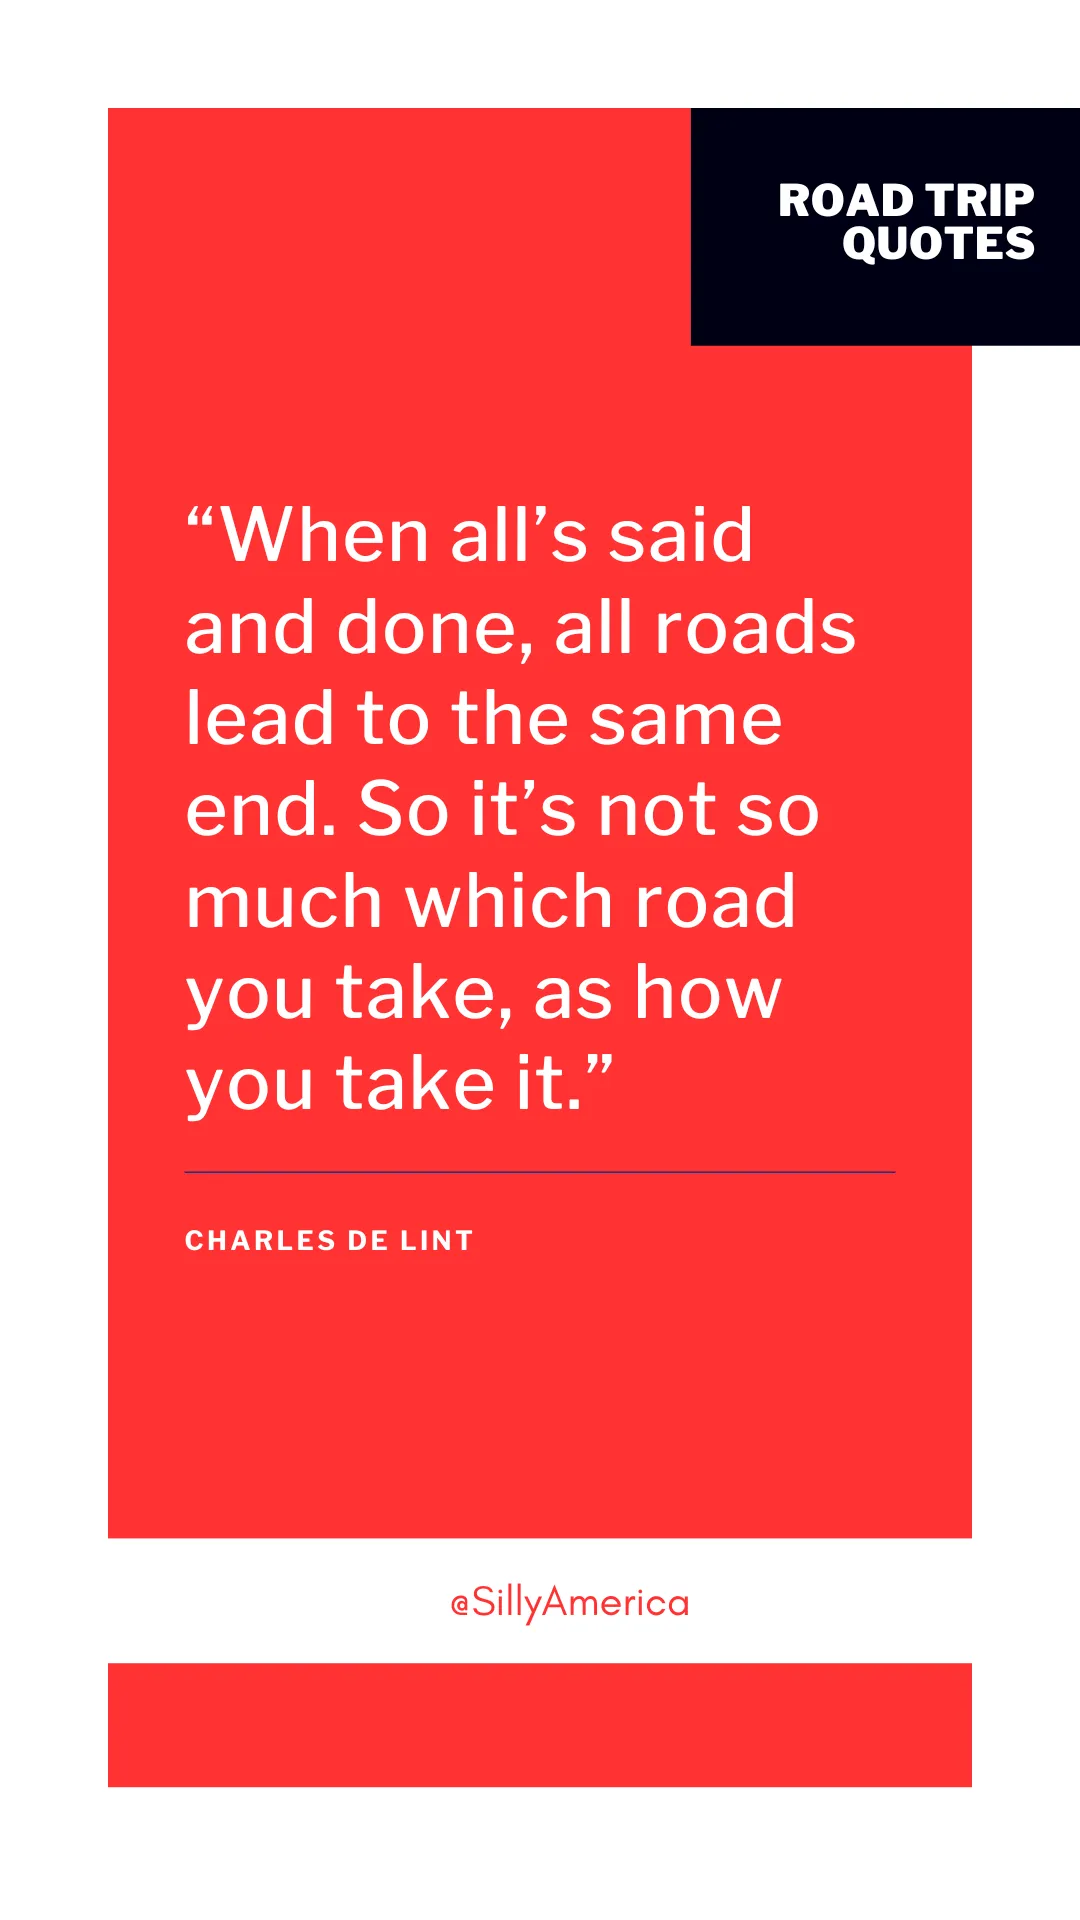 “When all’s said and done, all roads lead to the same end. So it’s not so much which road you take, as how you take it.” Charles de Lint, Greenmantle